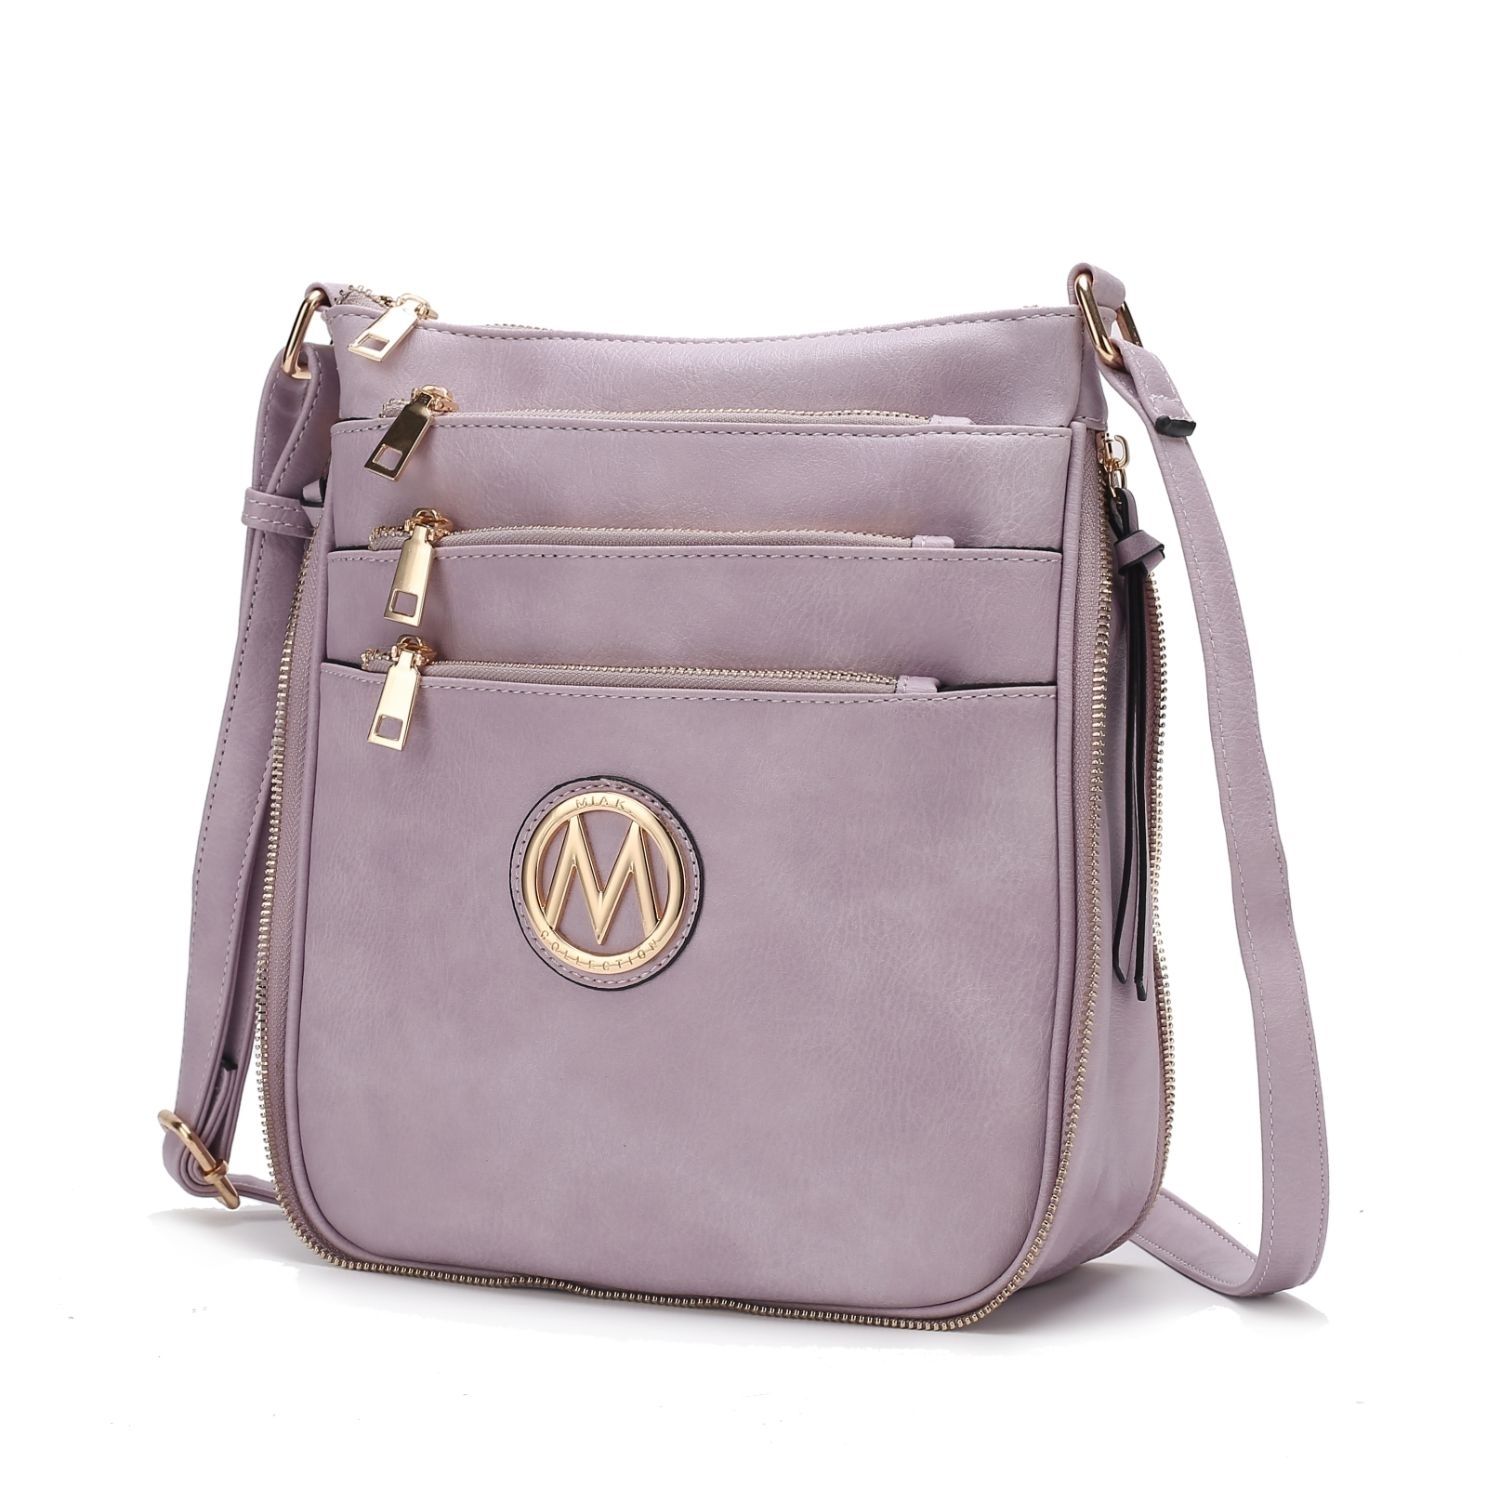 MKF Collection Salome Expandable Multi-Compartment Cross Body By Mia K. Handbag - Lilac